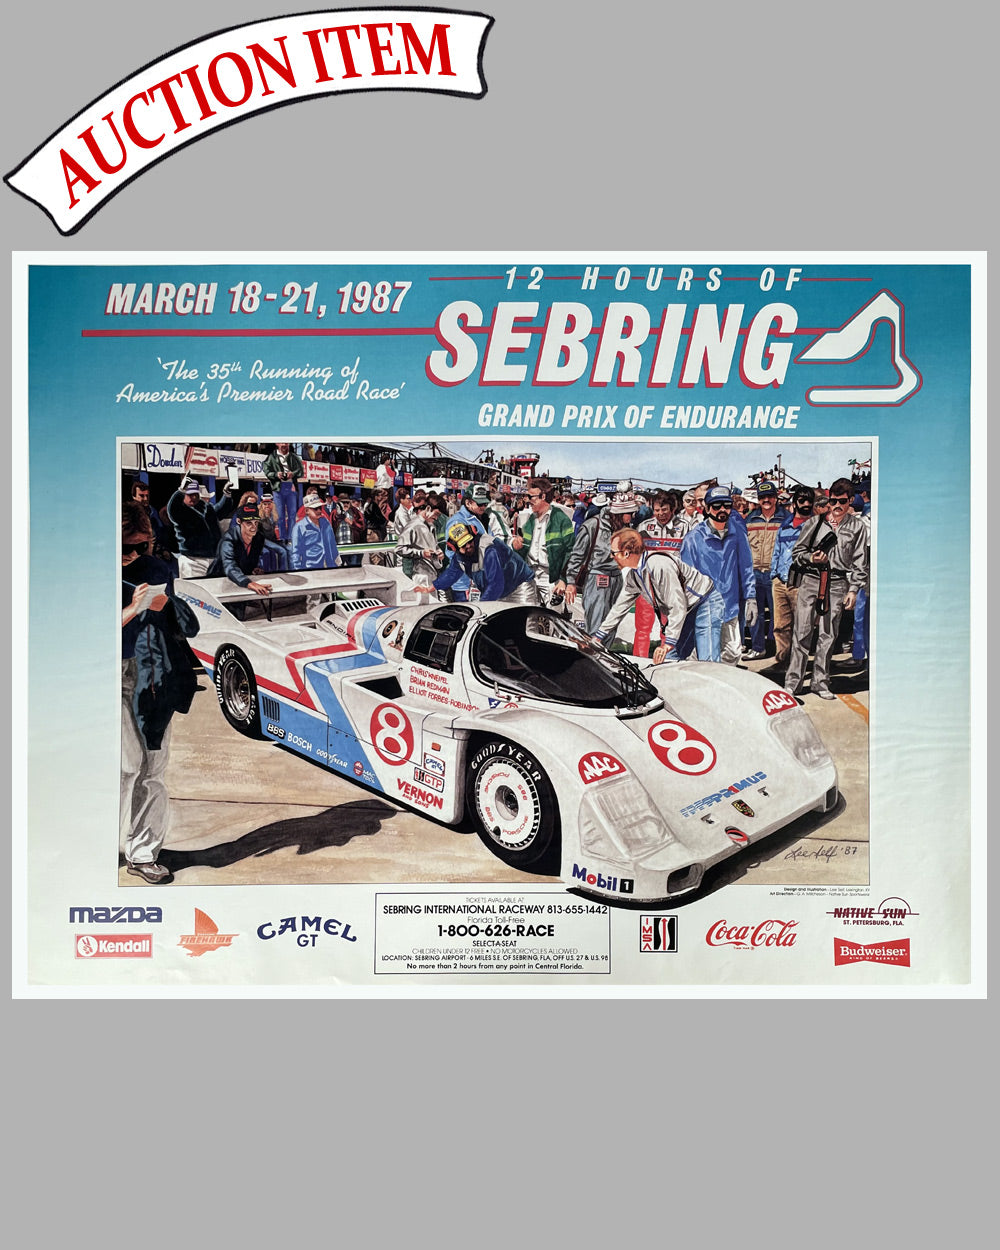 4 - 12 Hours of Sebring 1987 official race poster by Lee Self